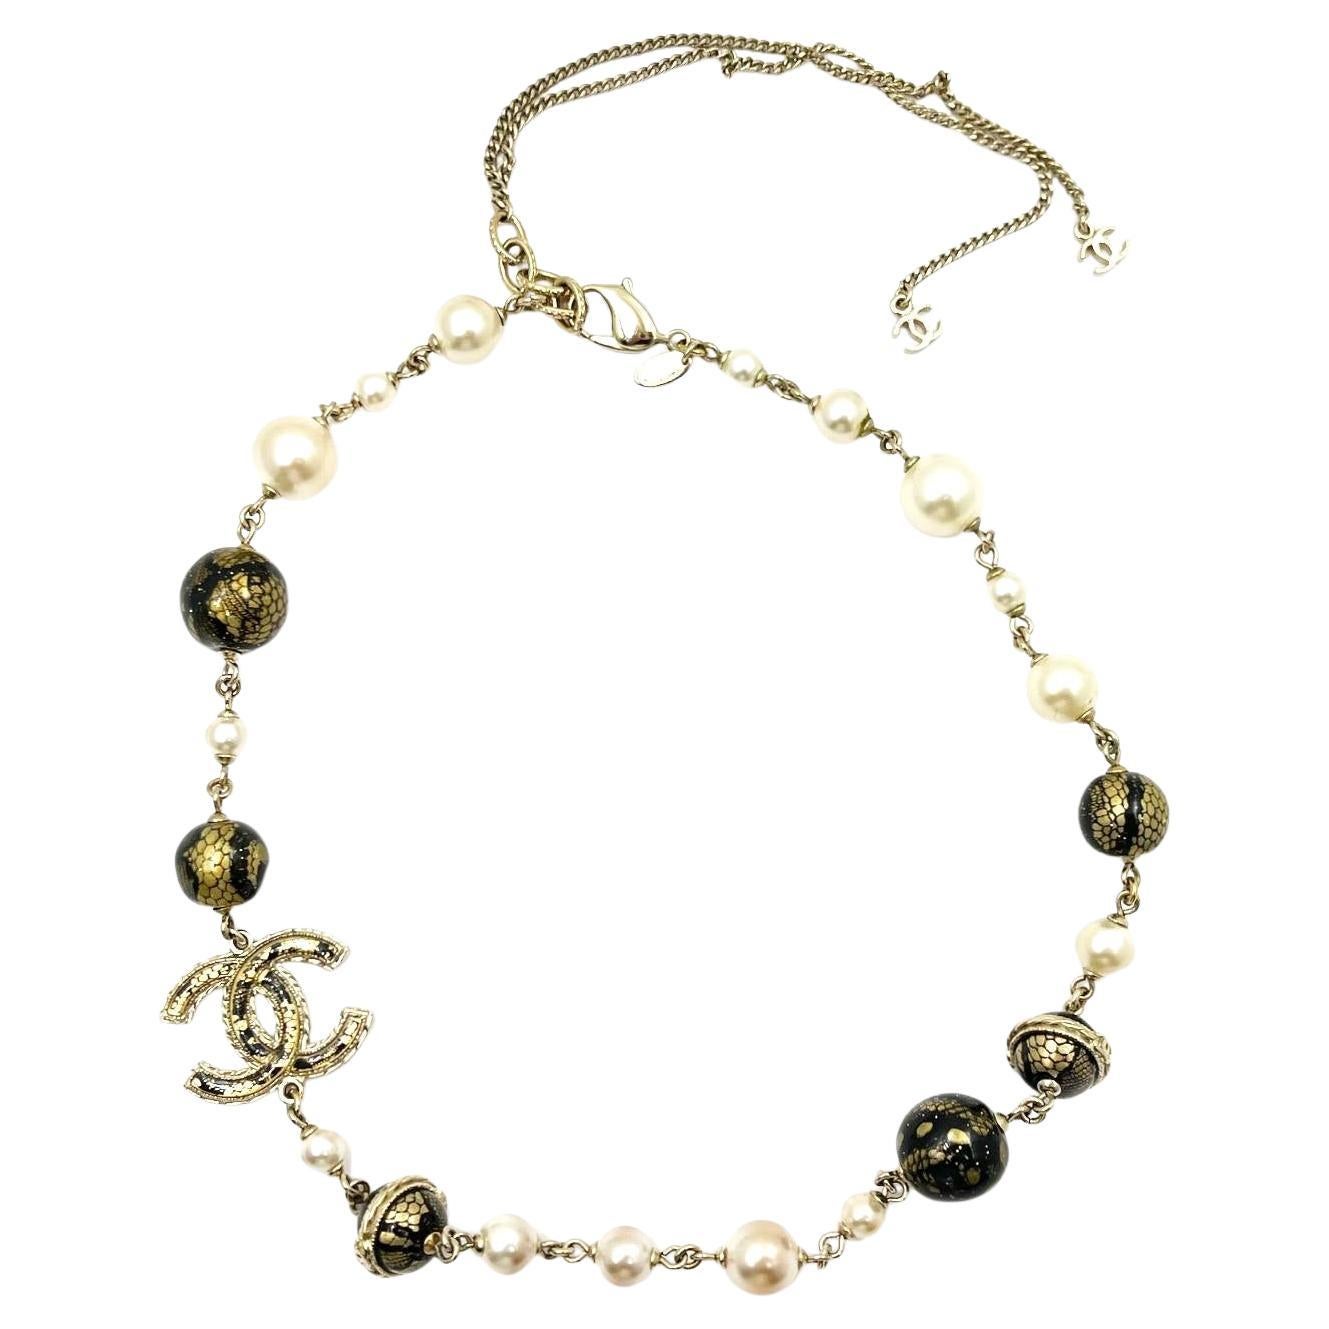 Authentic CHANEL CC Faux Pearl Resin Short Choker Necklace Gold Chain